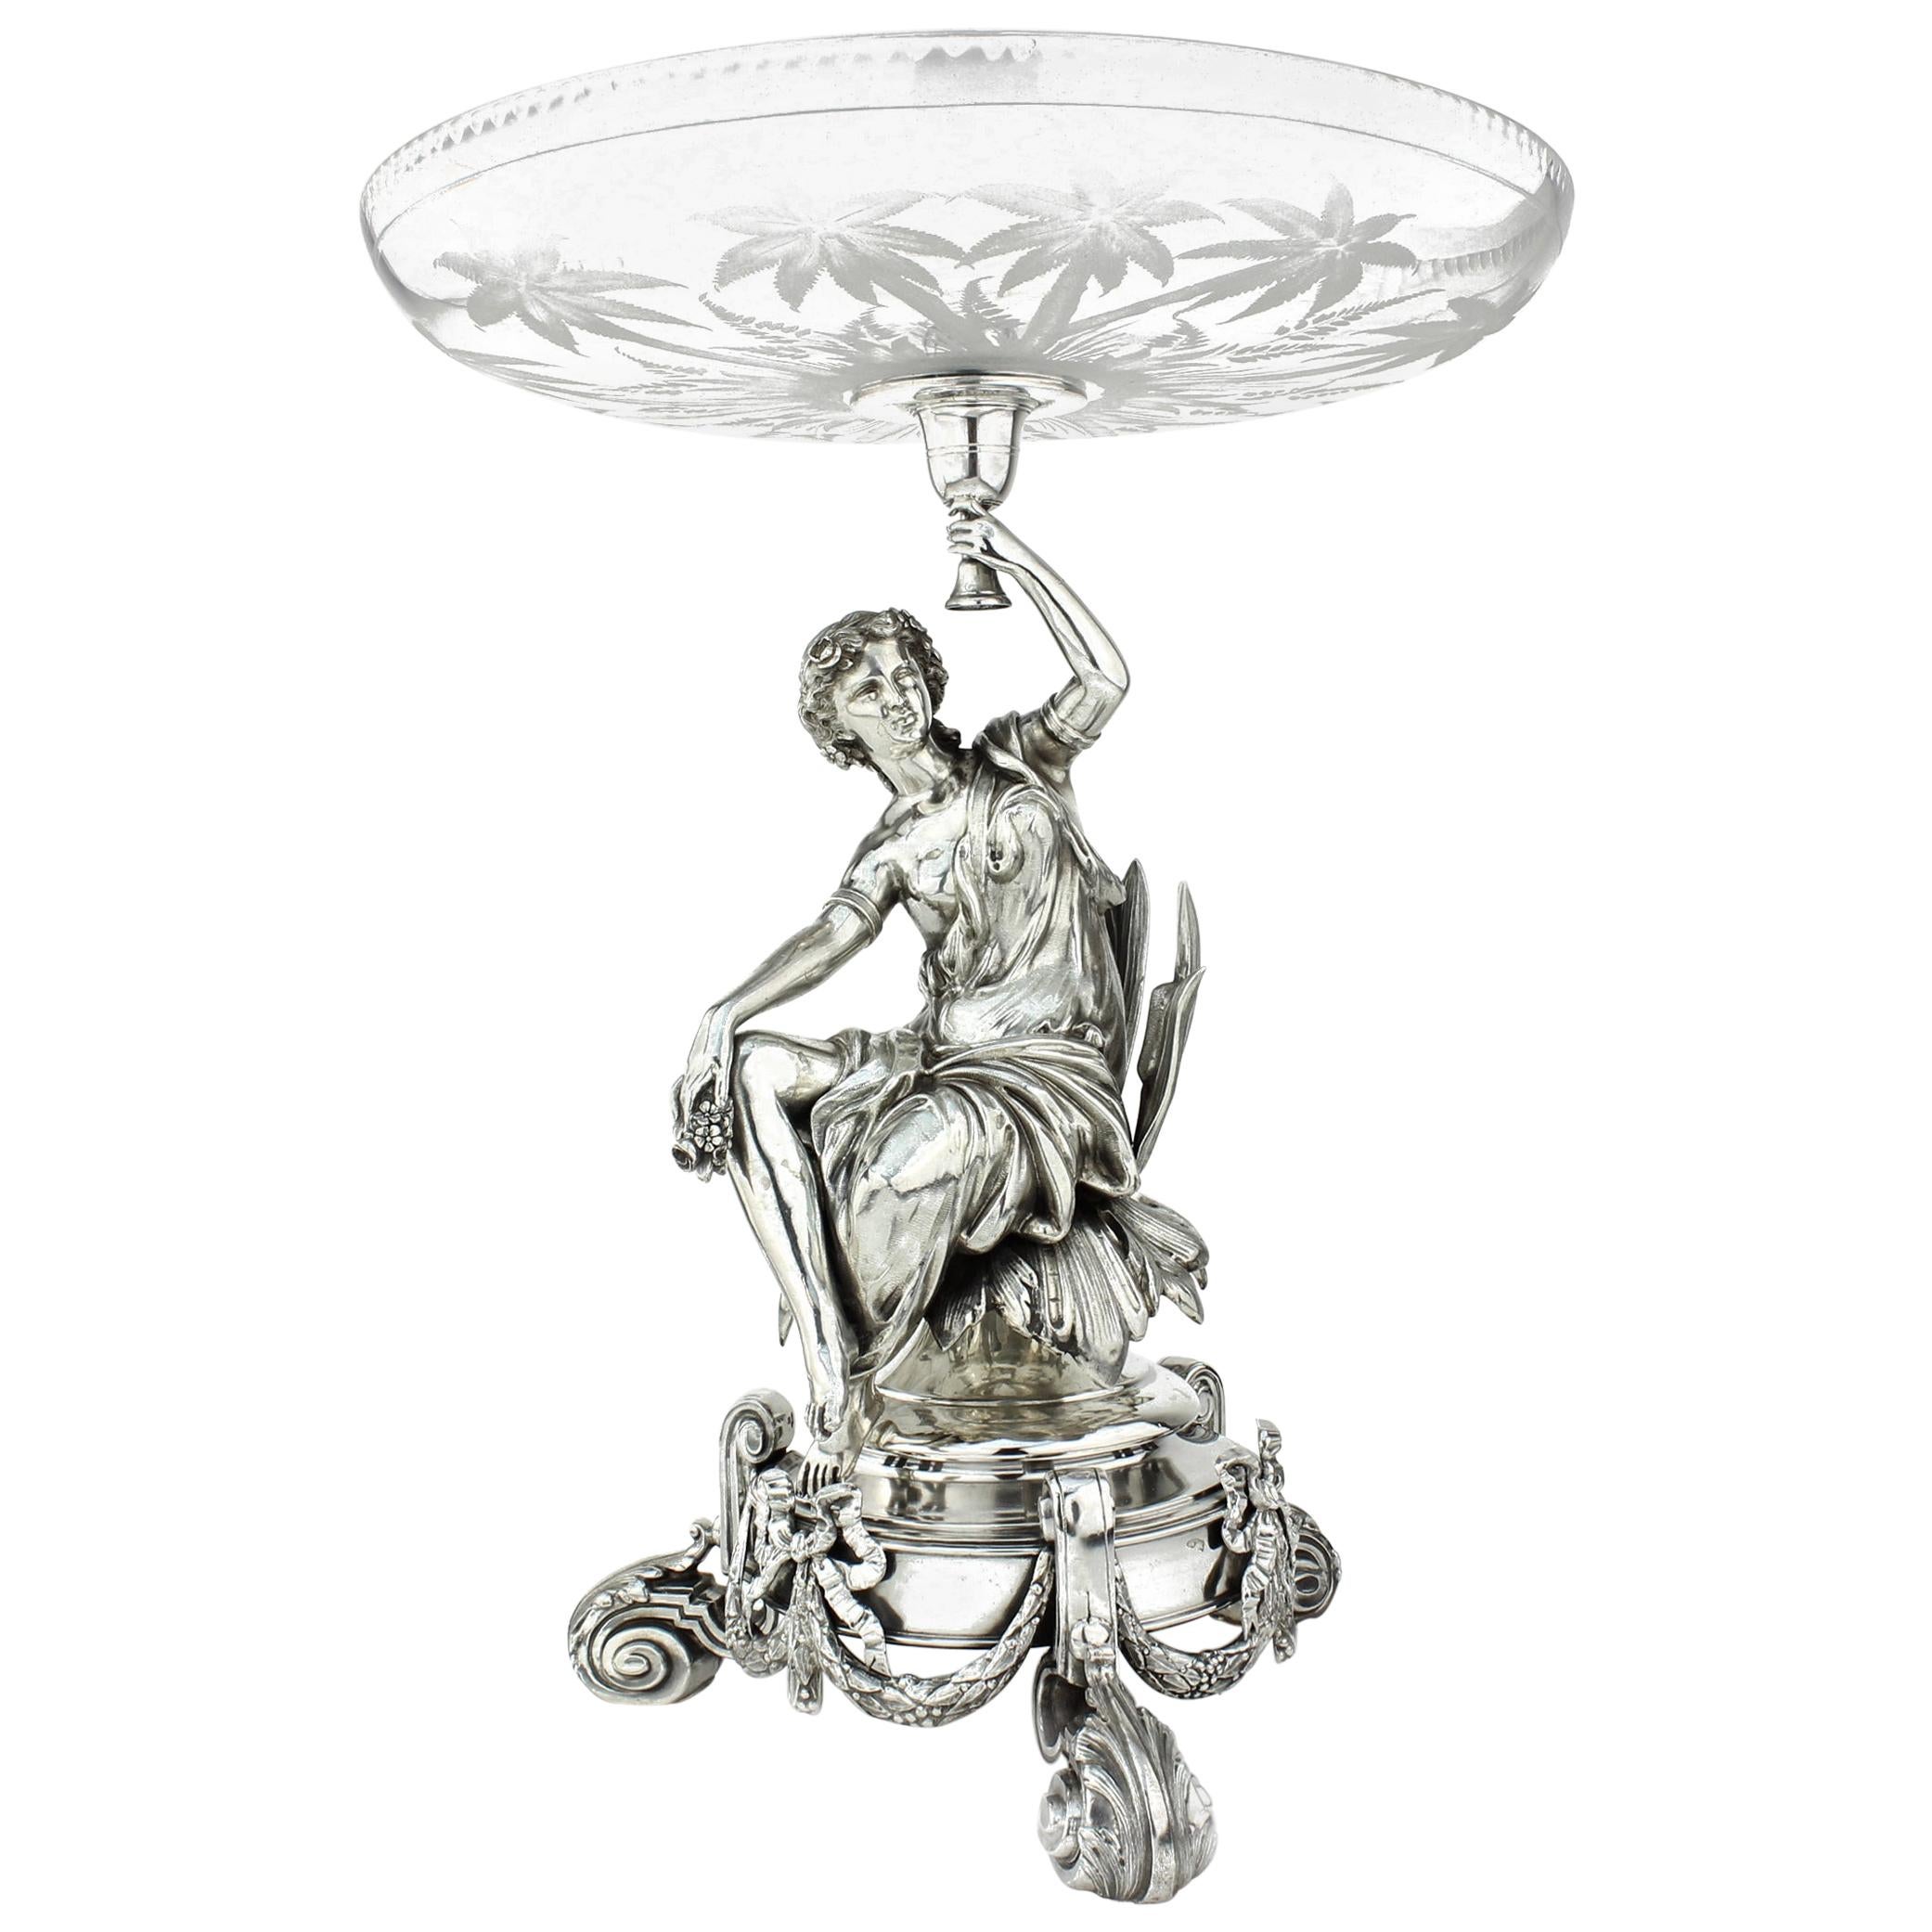 19th Century French Silver and Cut Glass Centrepiece, France, circa 1880